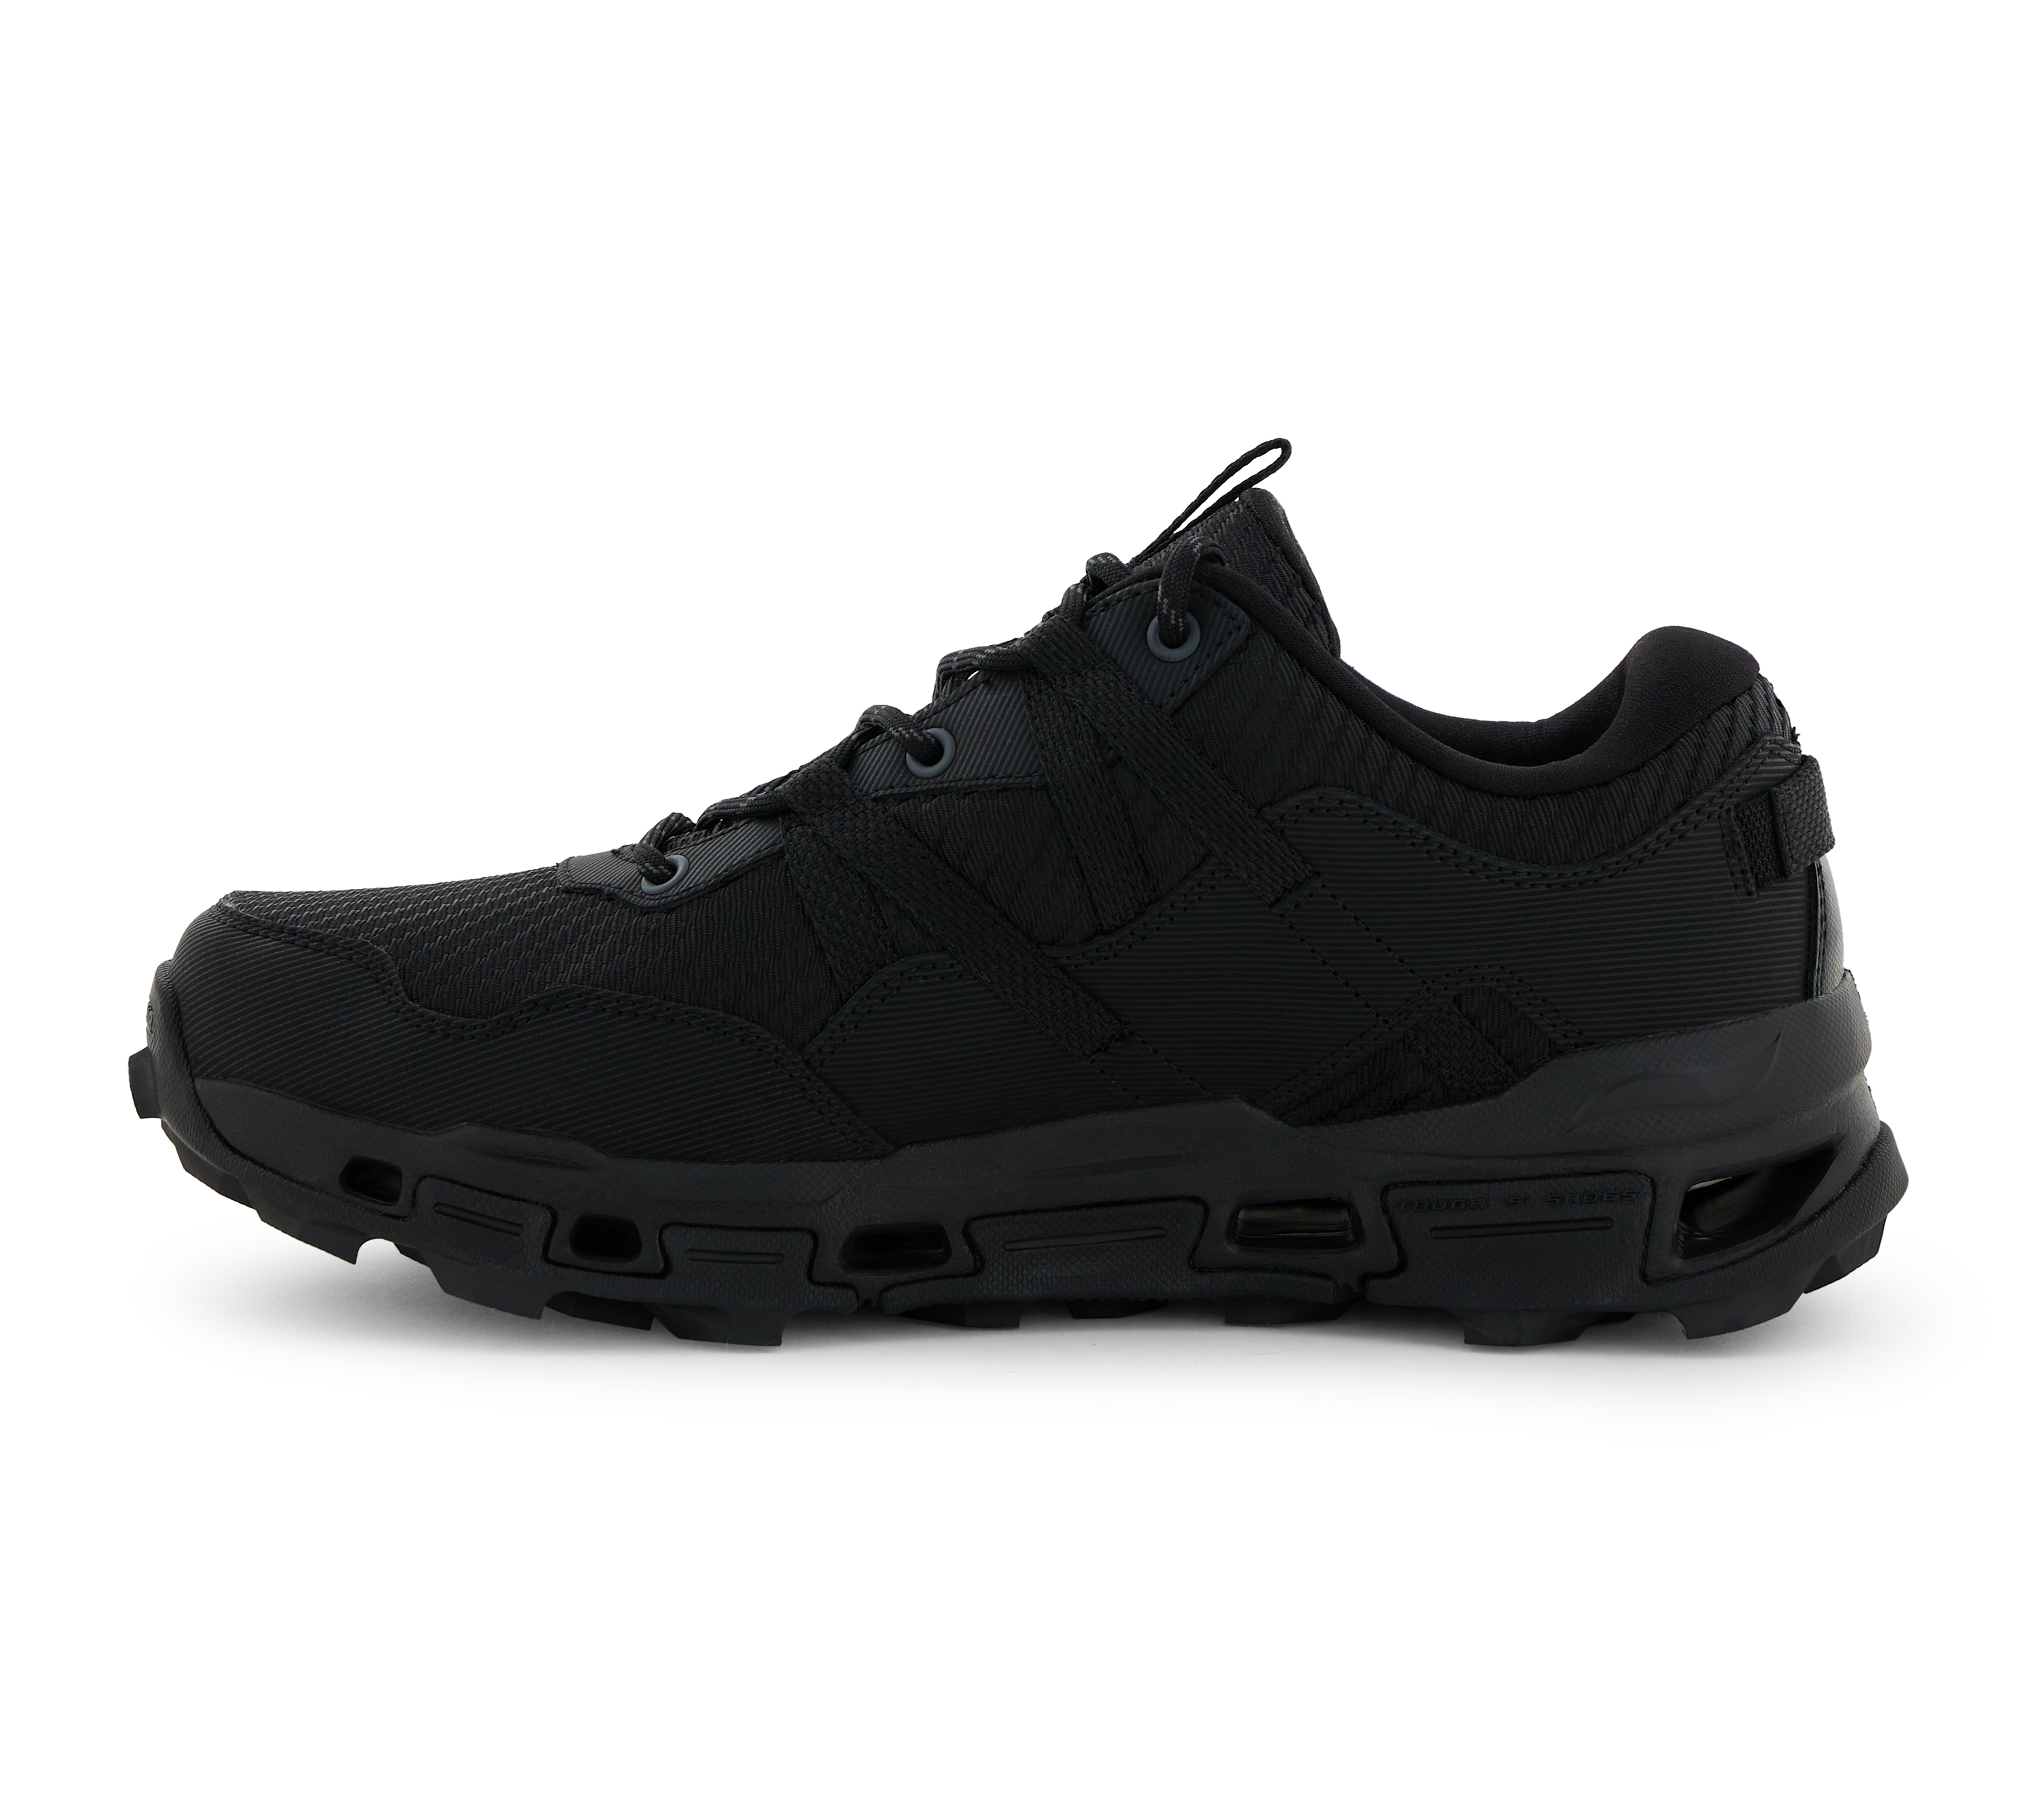 ARCH FIT GLIDE-STEP TRAIL, BBLACK Footwear Left View